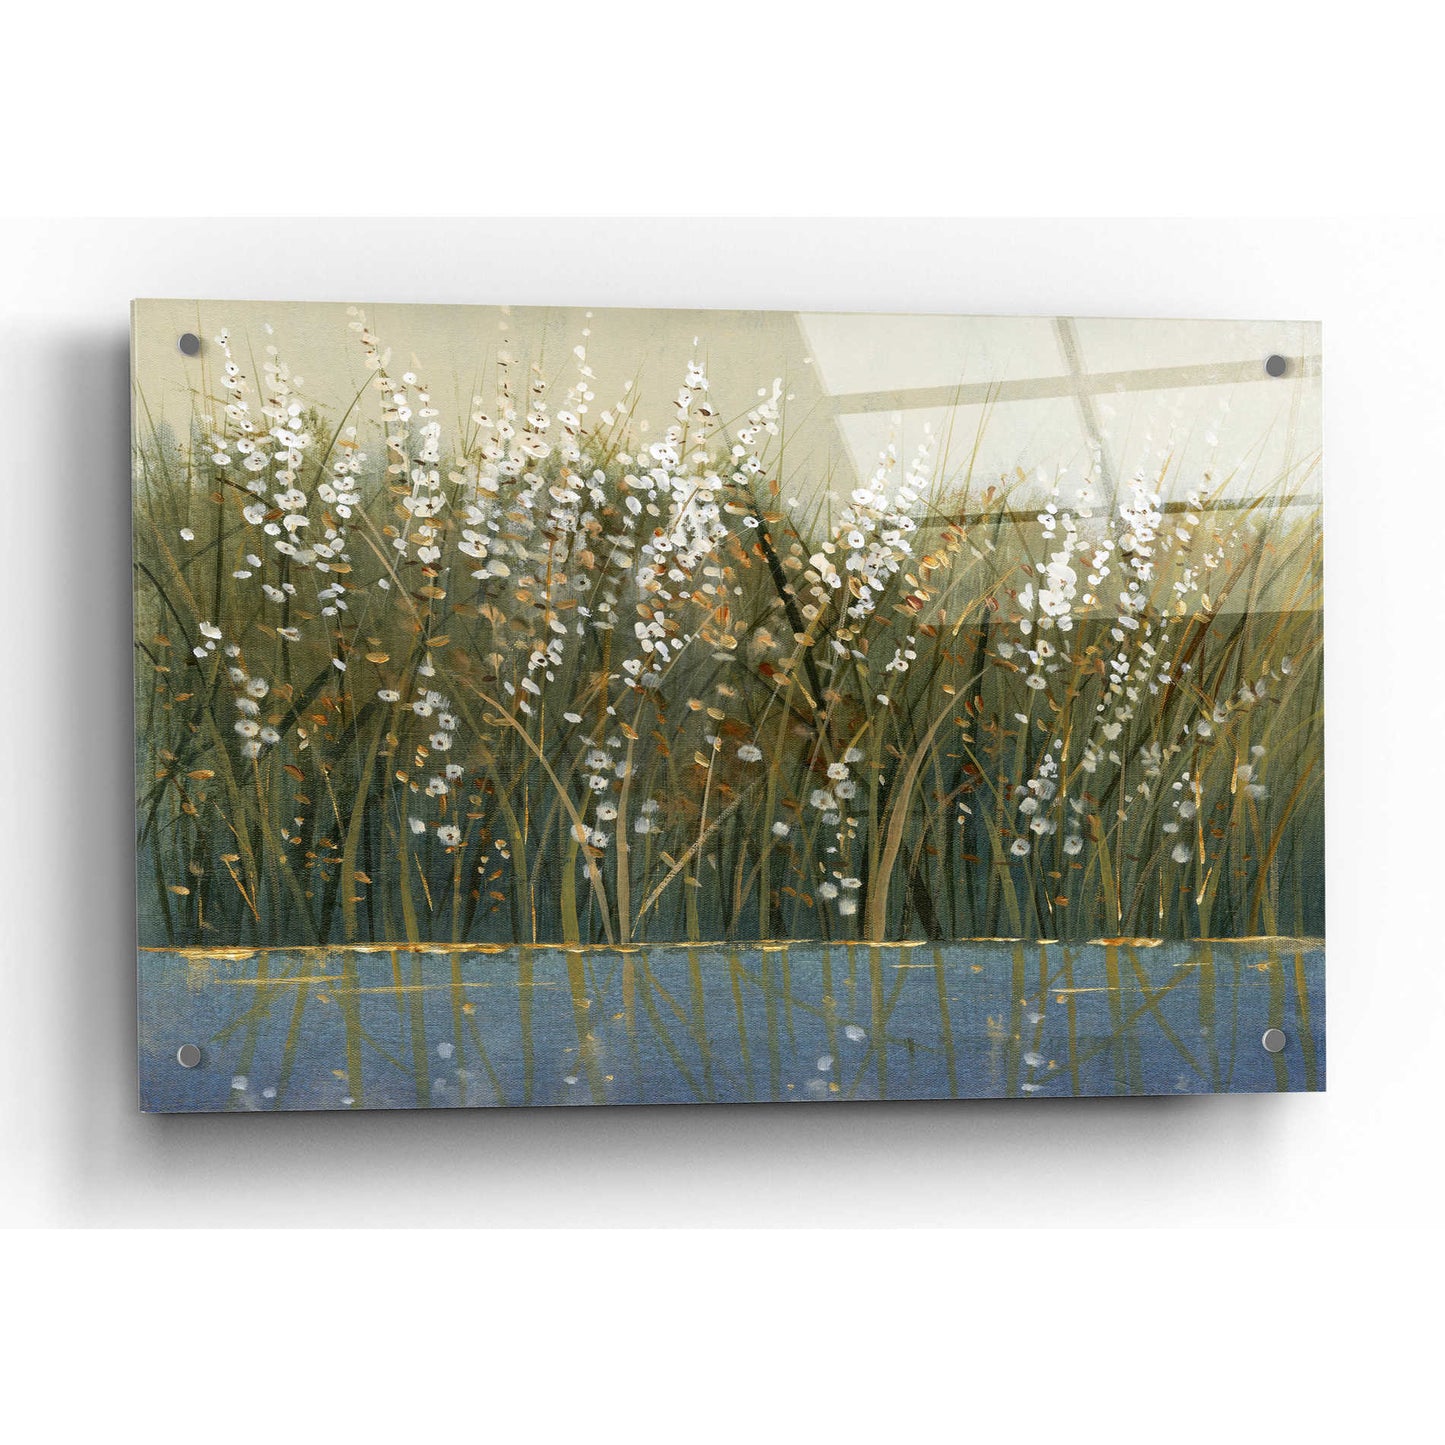 Epic Art 'By the Tall Grass I' by Tim O'Toole, Acrylic Glass Wall Art,36x24